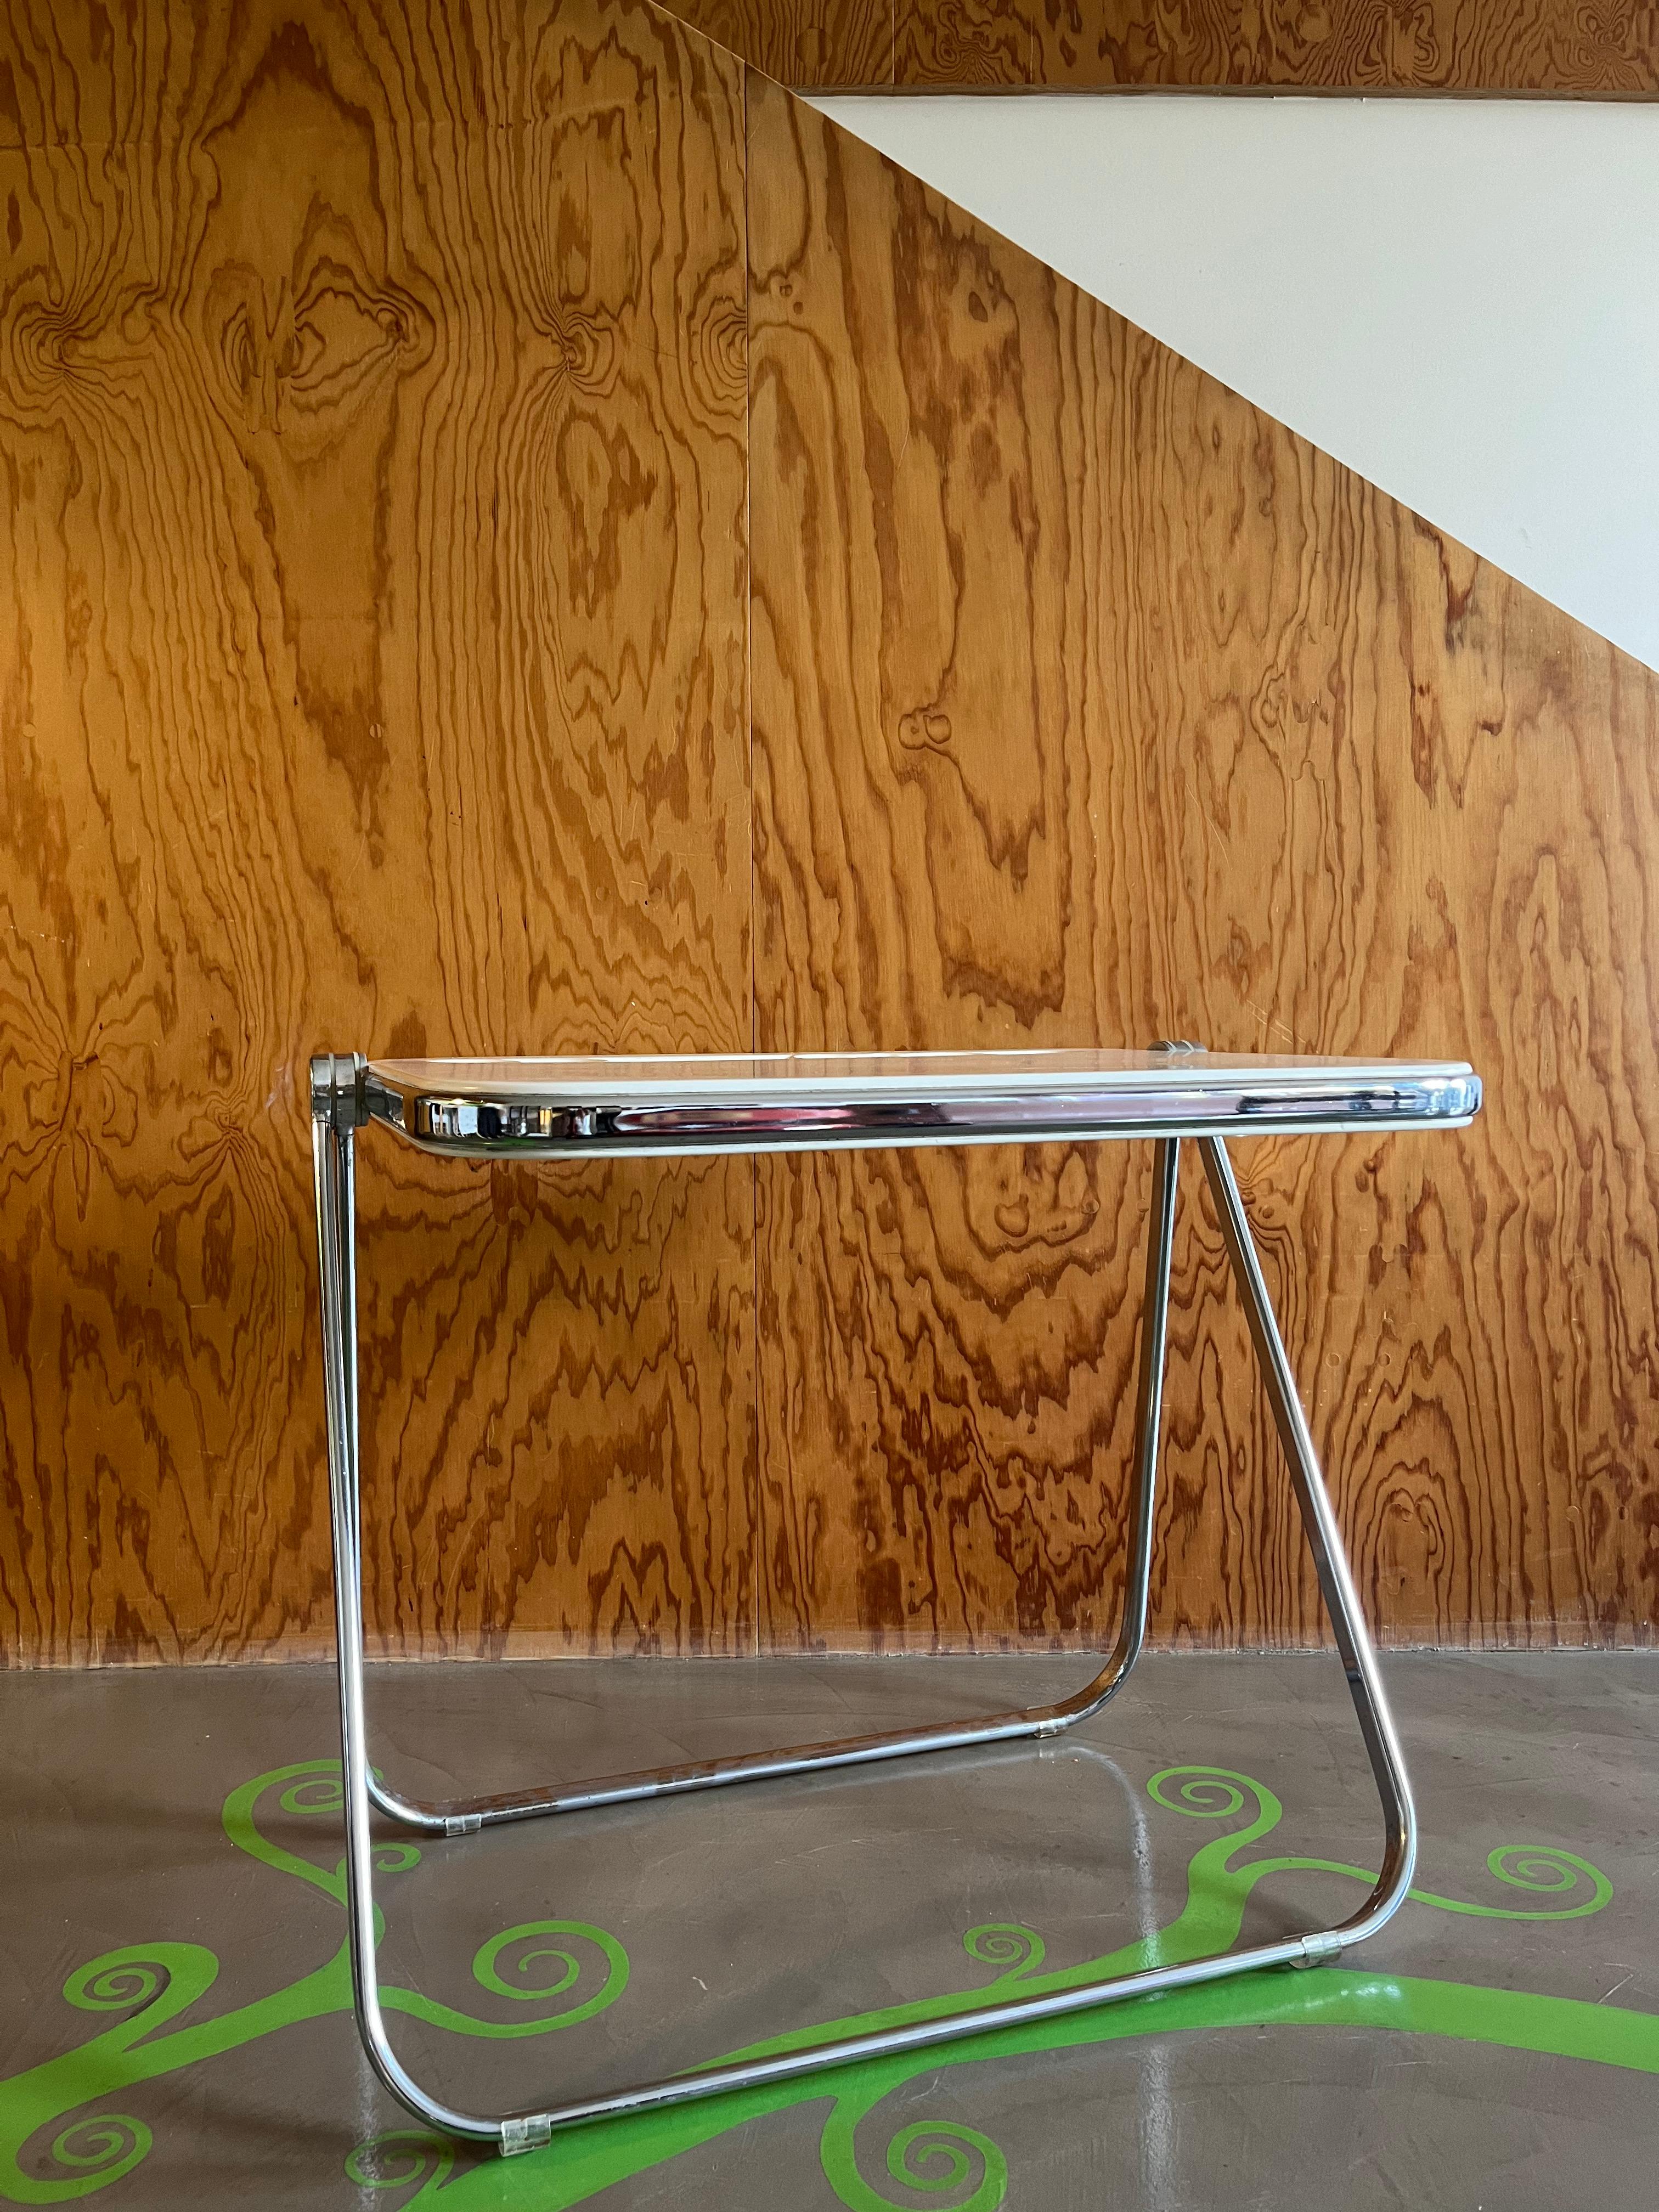 Iconic folding table with white polycarbonate top with storage compartments and silver chromed metal legs. The table is named Plato, was designed by Giancarlo Piretti (Bologna - 1940), a great Italian designer, in 1970 and produced by the Italian